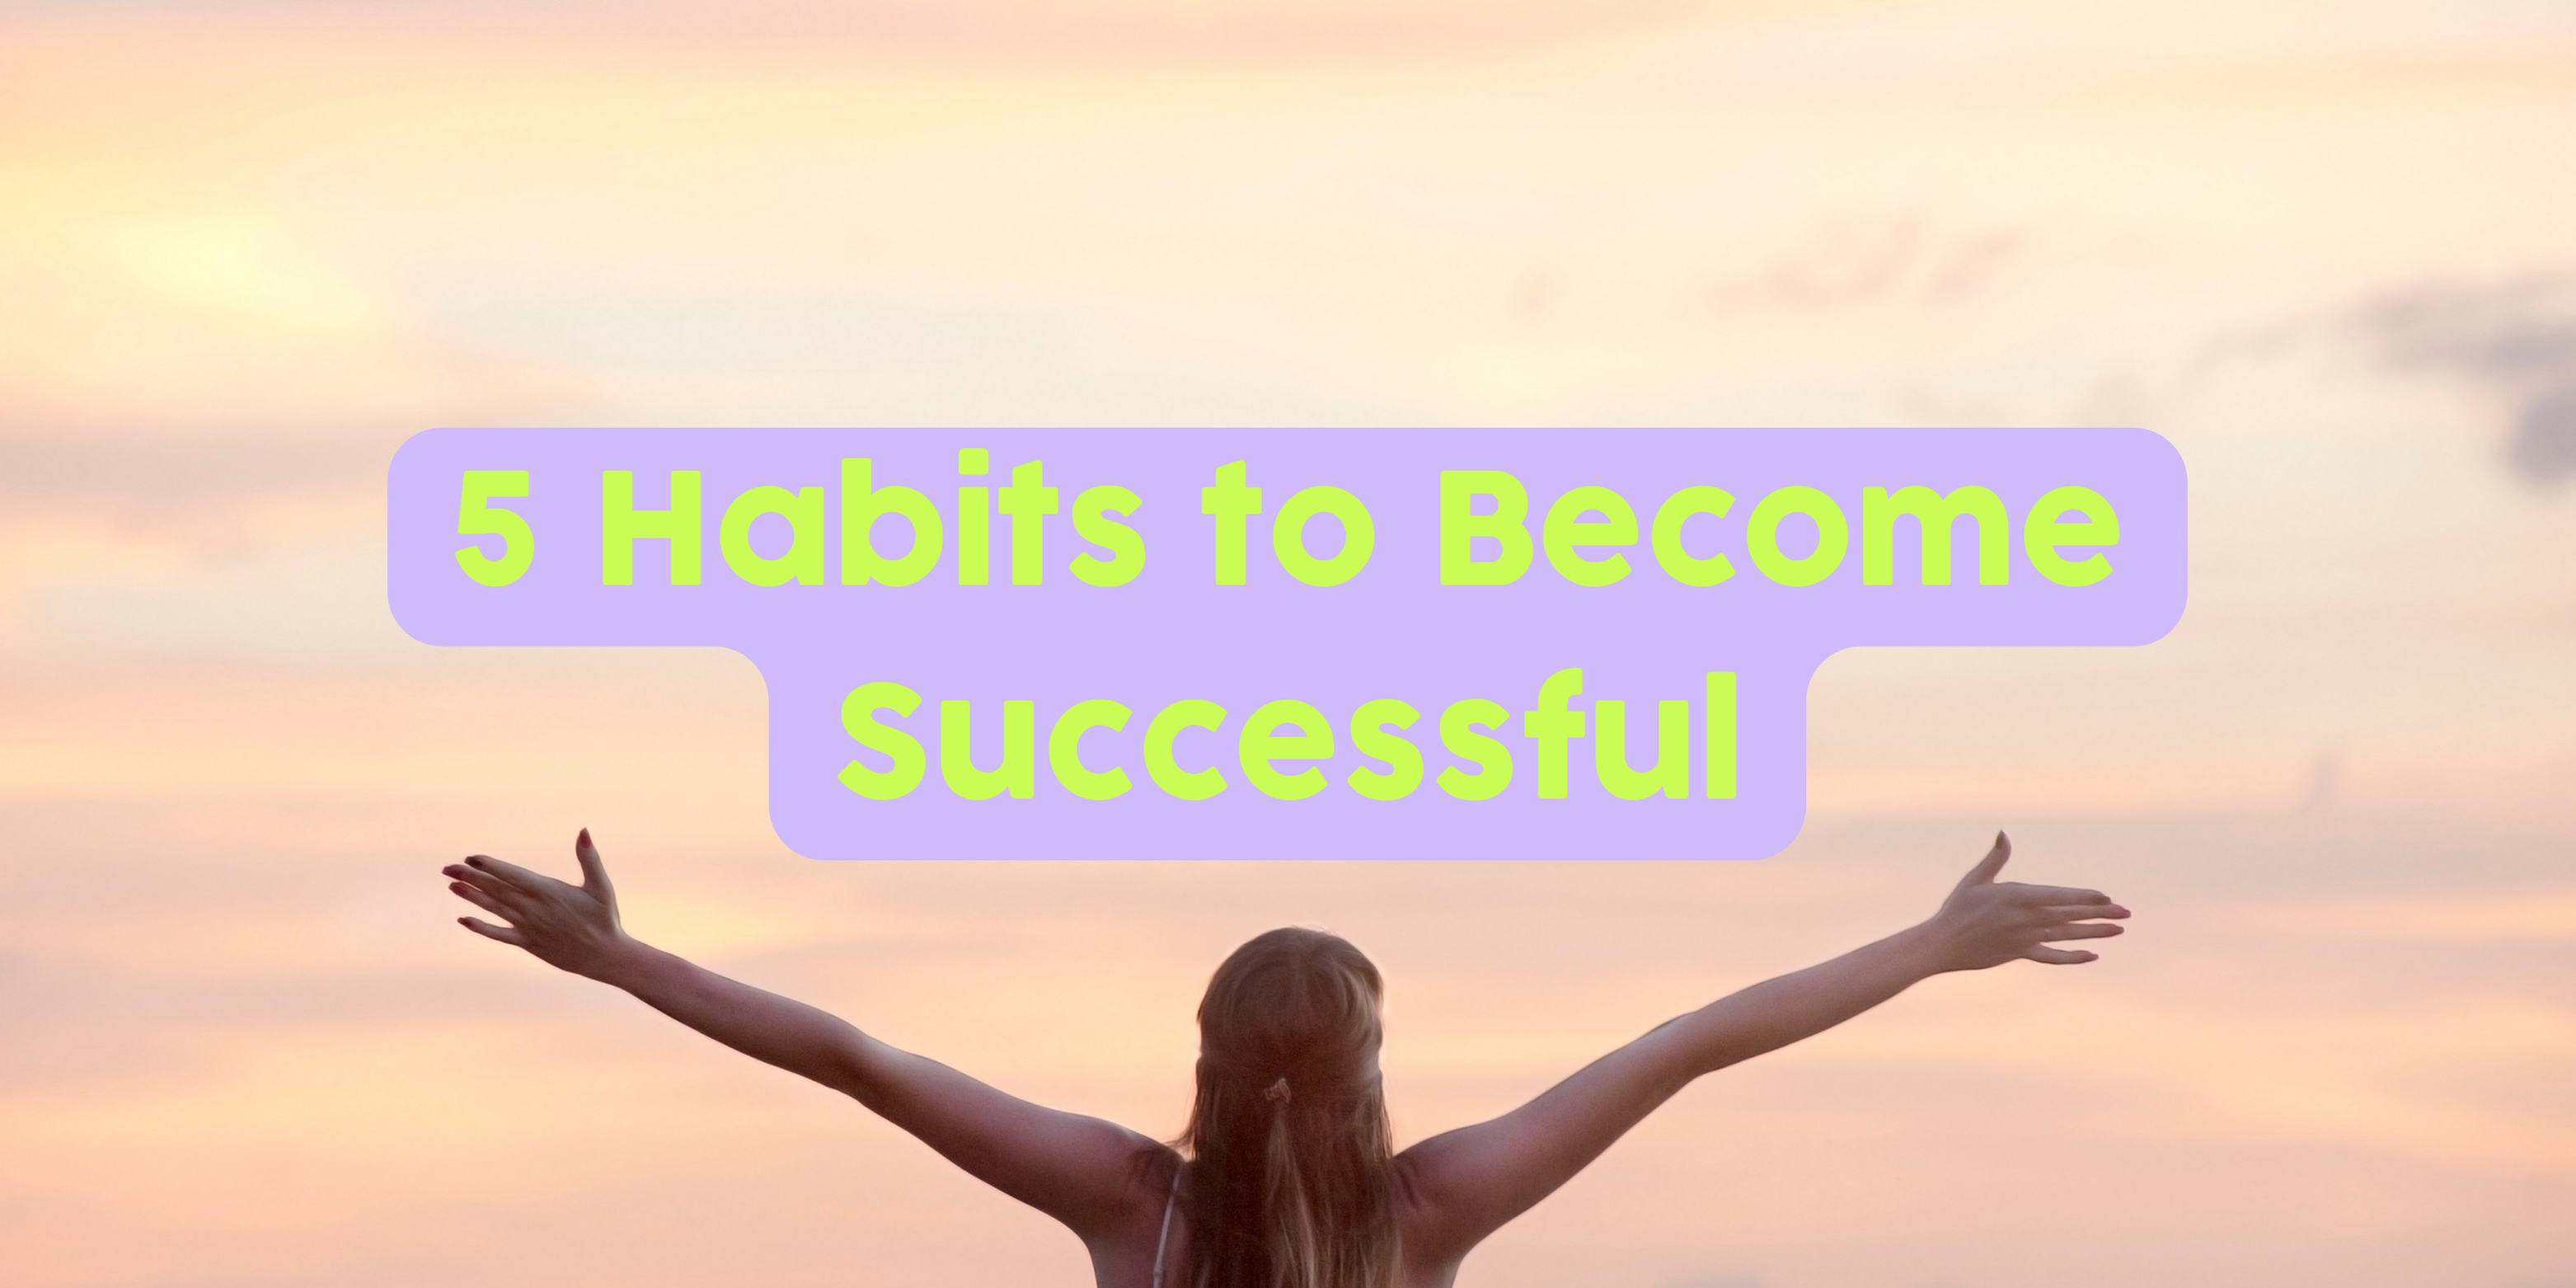 5 Habits to Become Successful